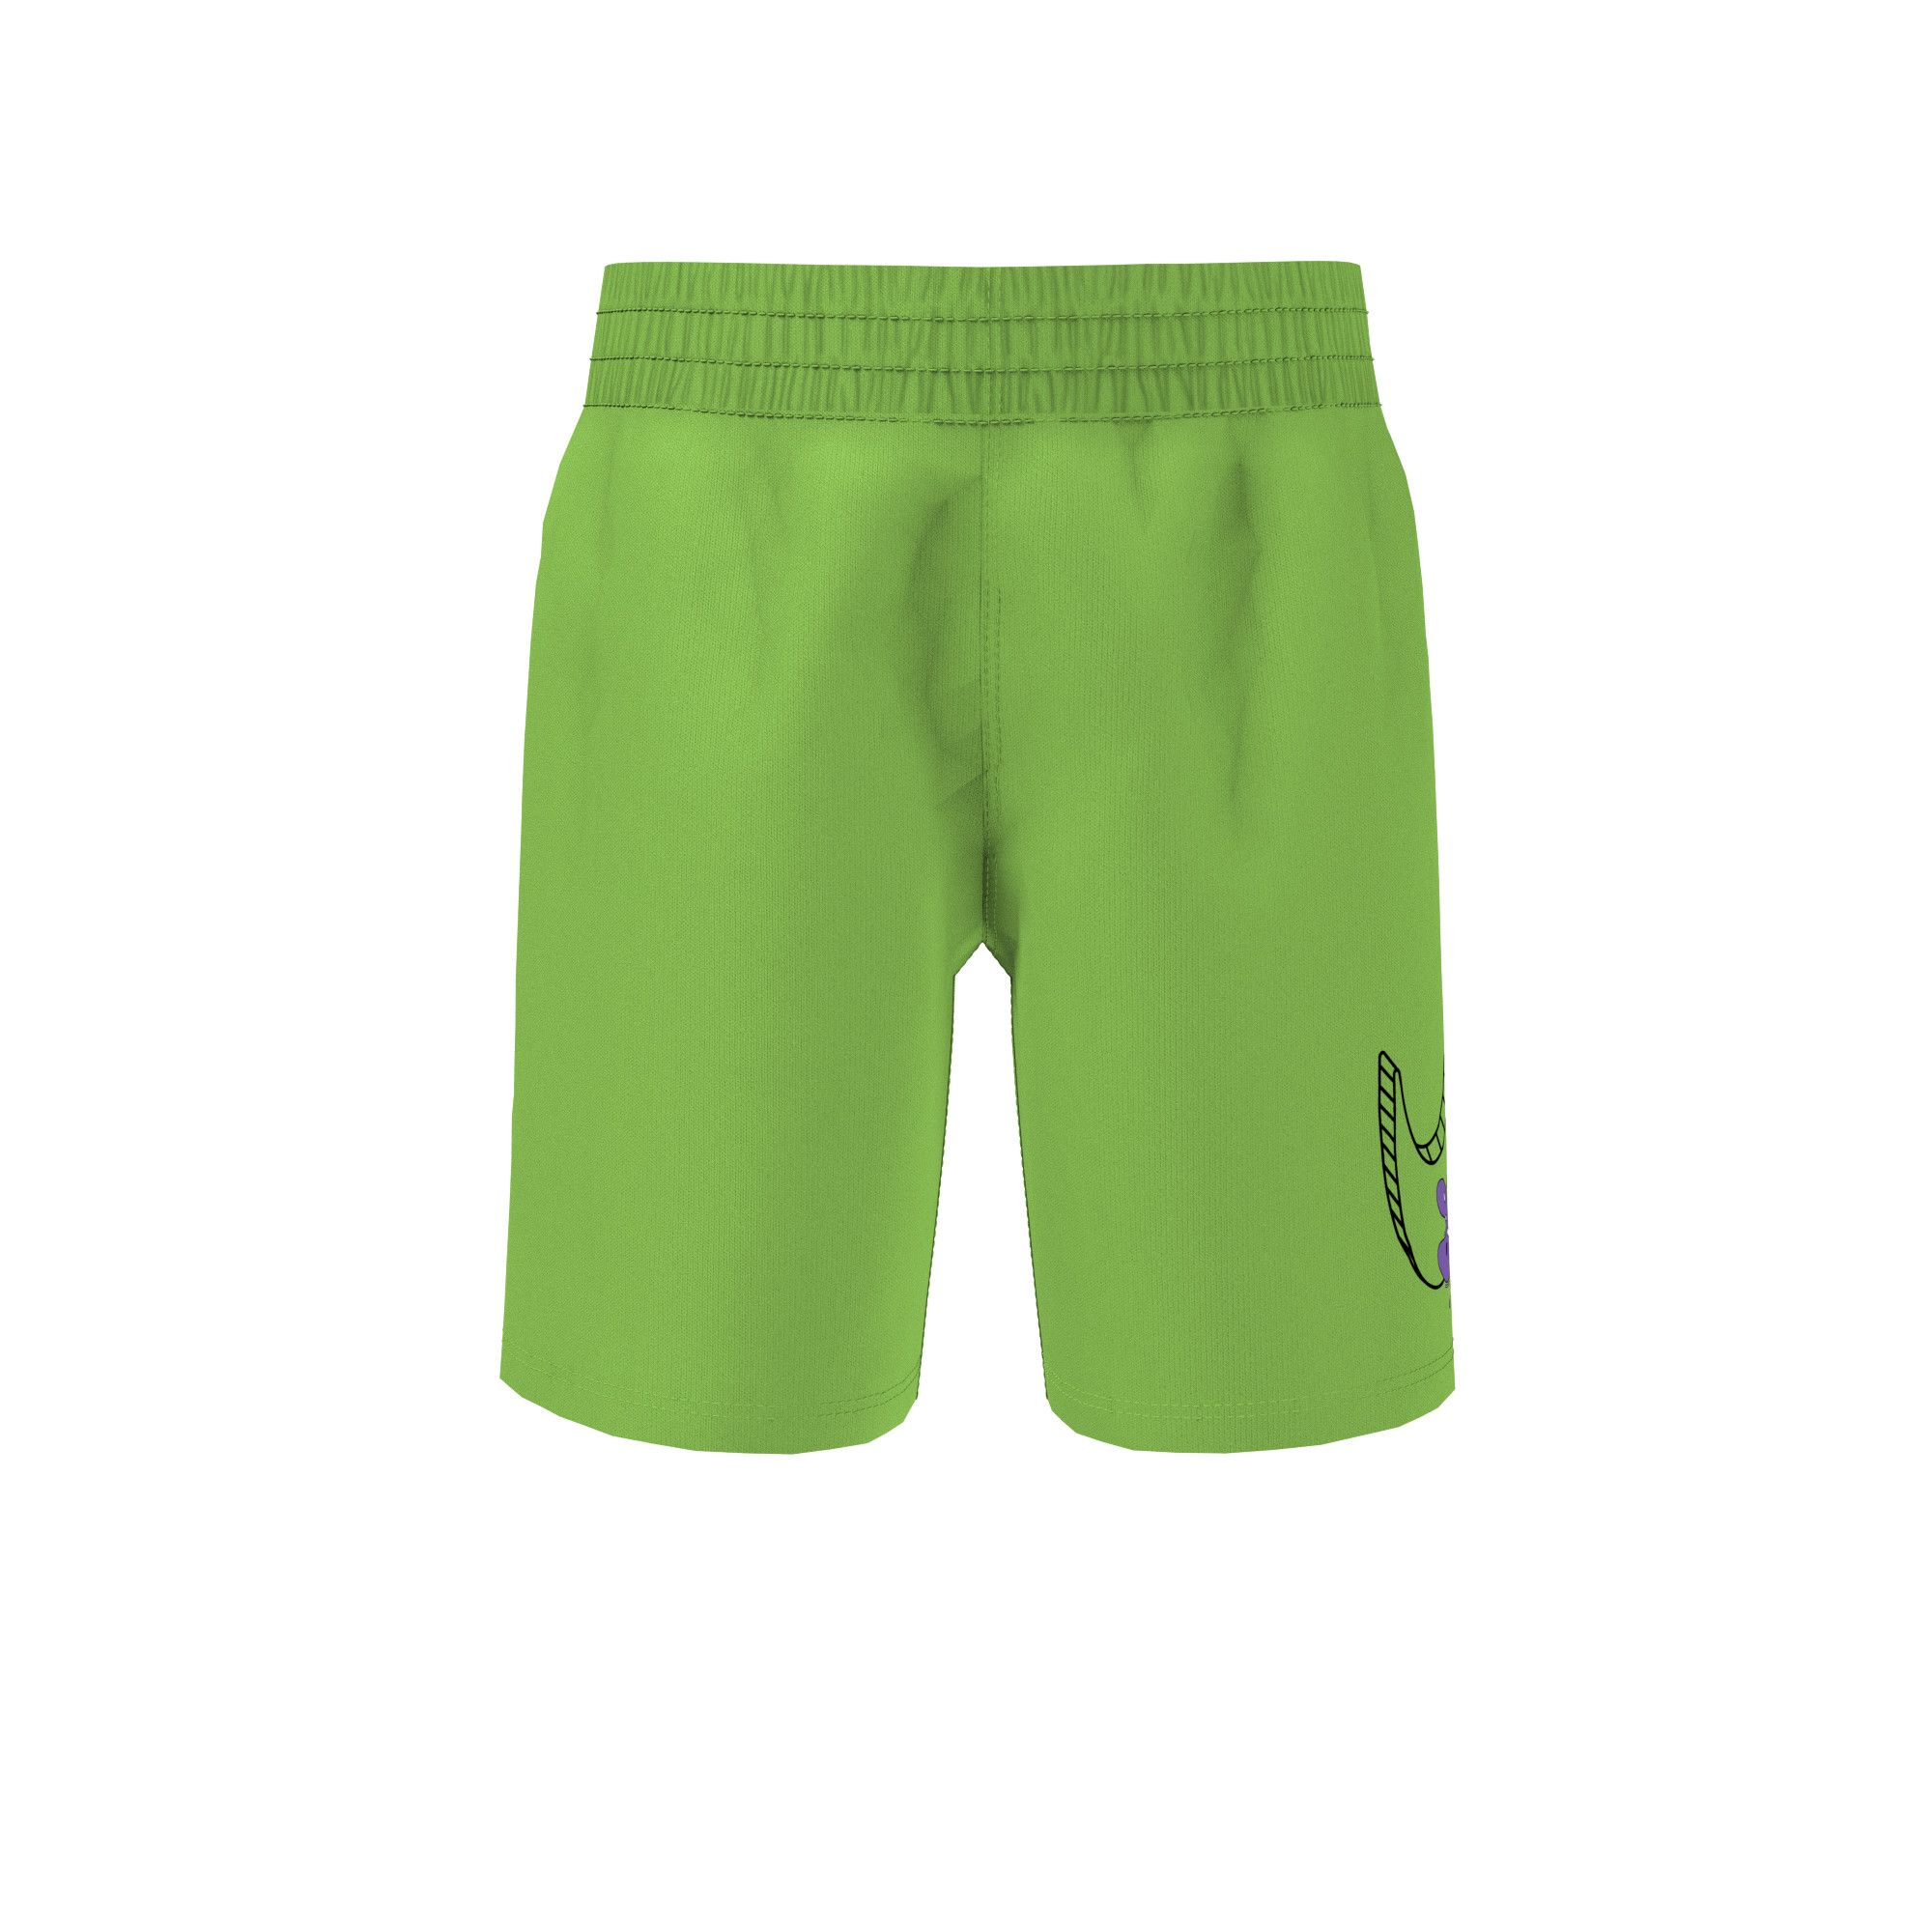 Image of Nike Toddler Boys' 4-7 Pool Party Breaker 5 Inch Volley Shorts